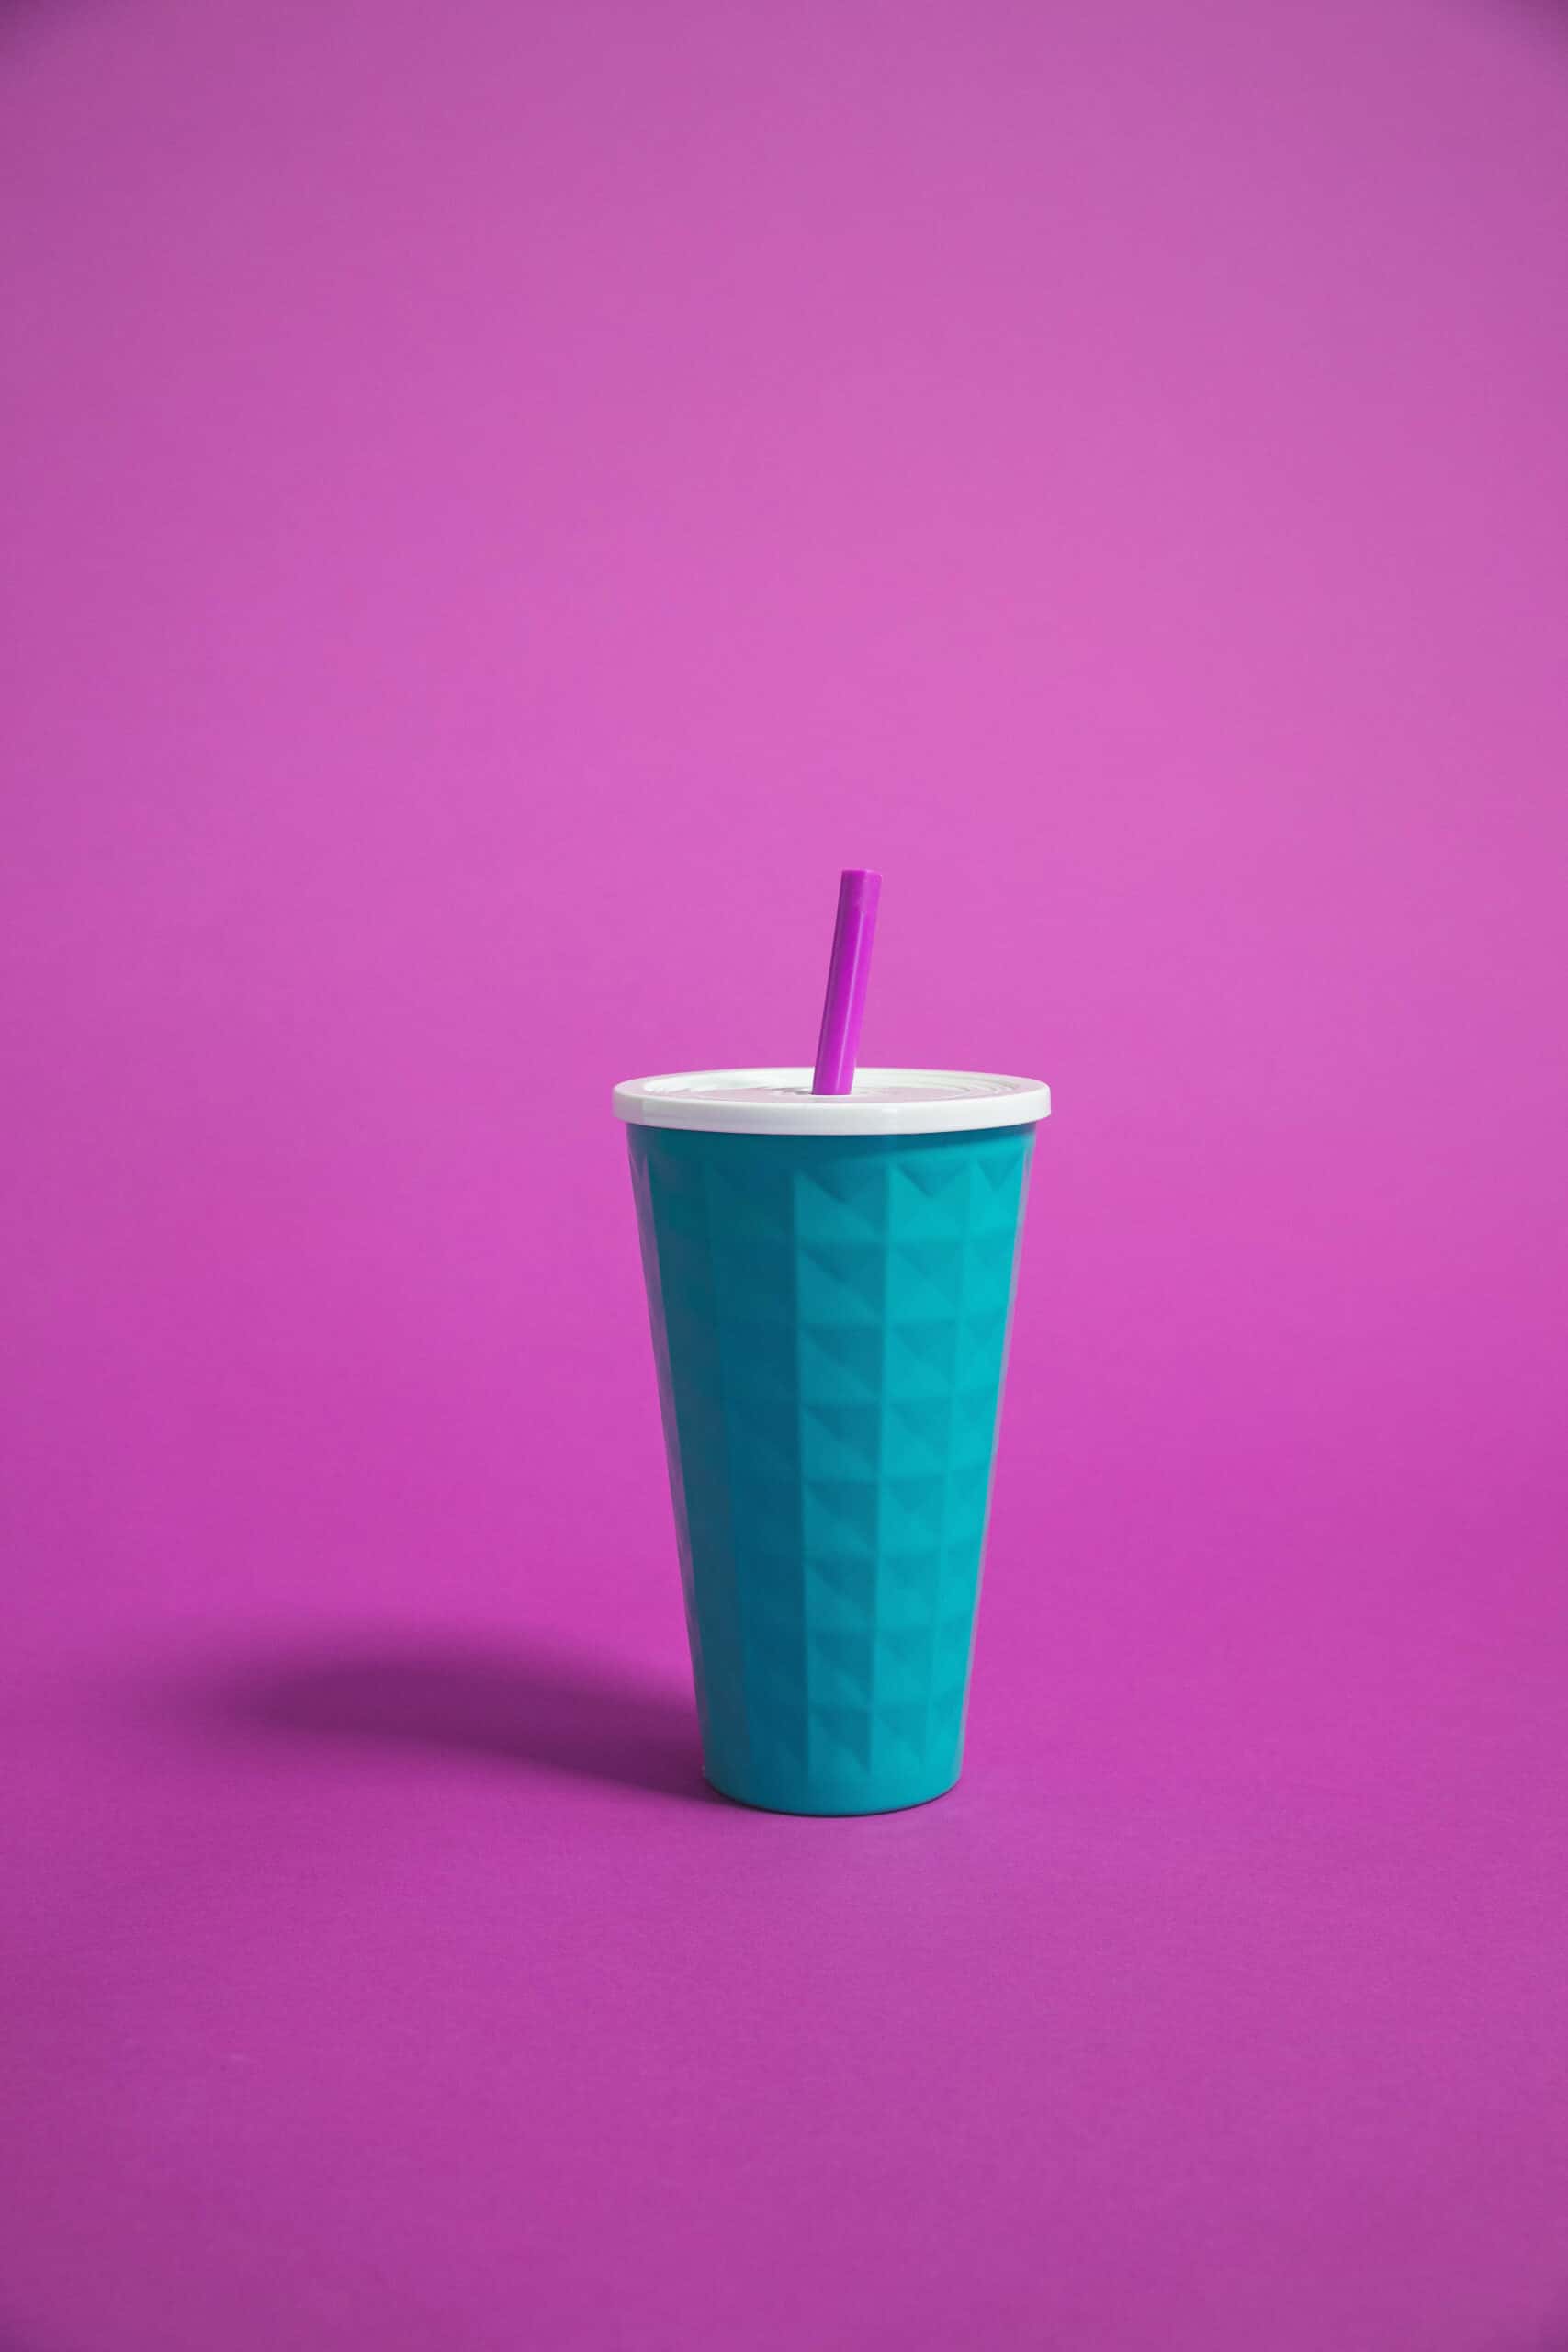 Blue cup with straw against a purple background.